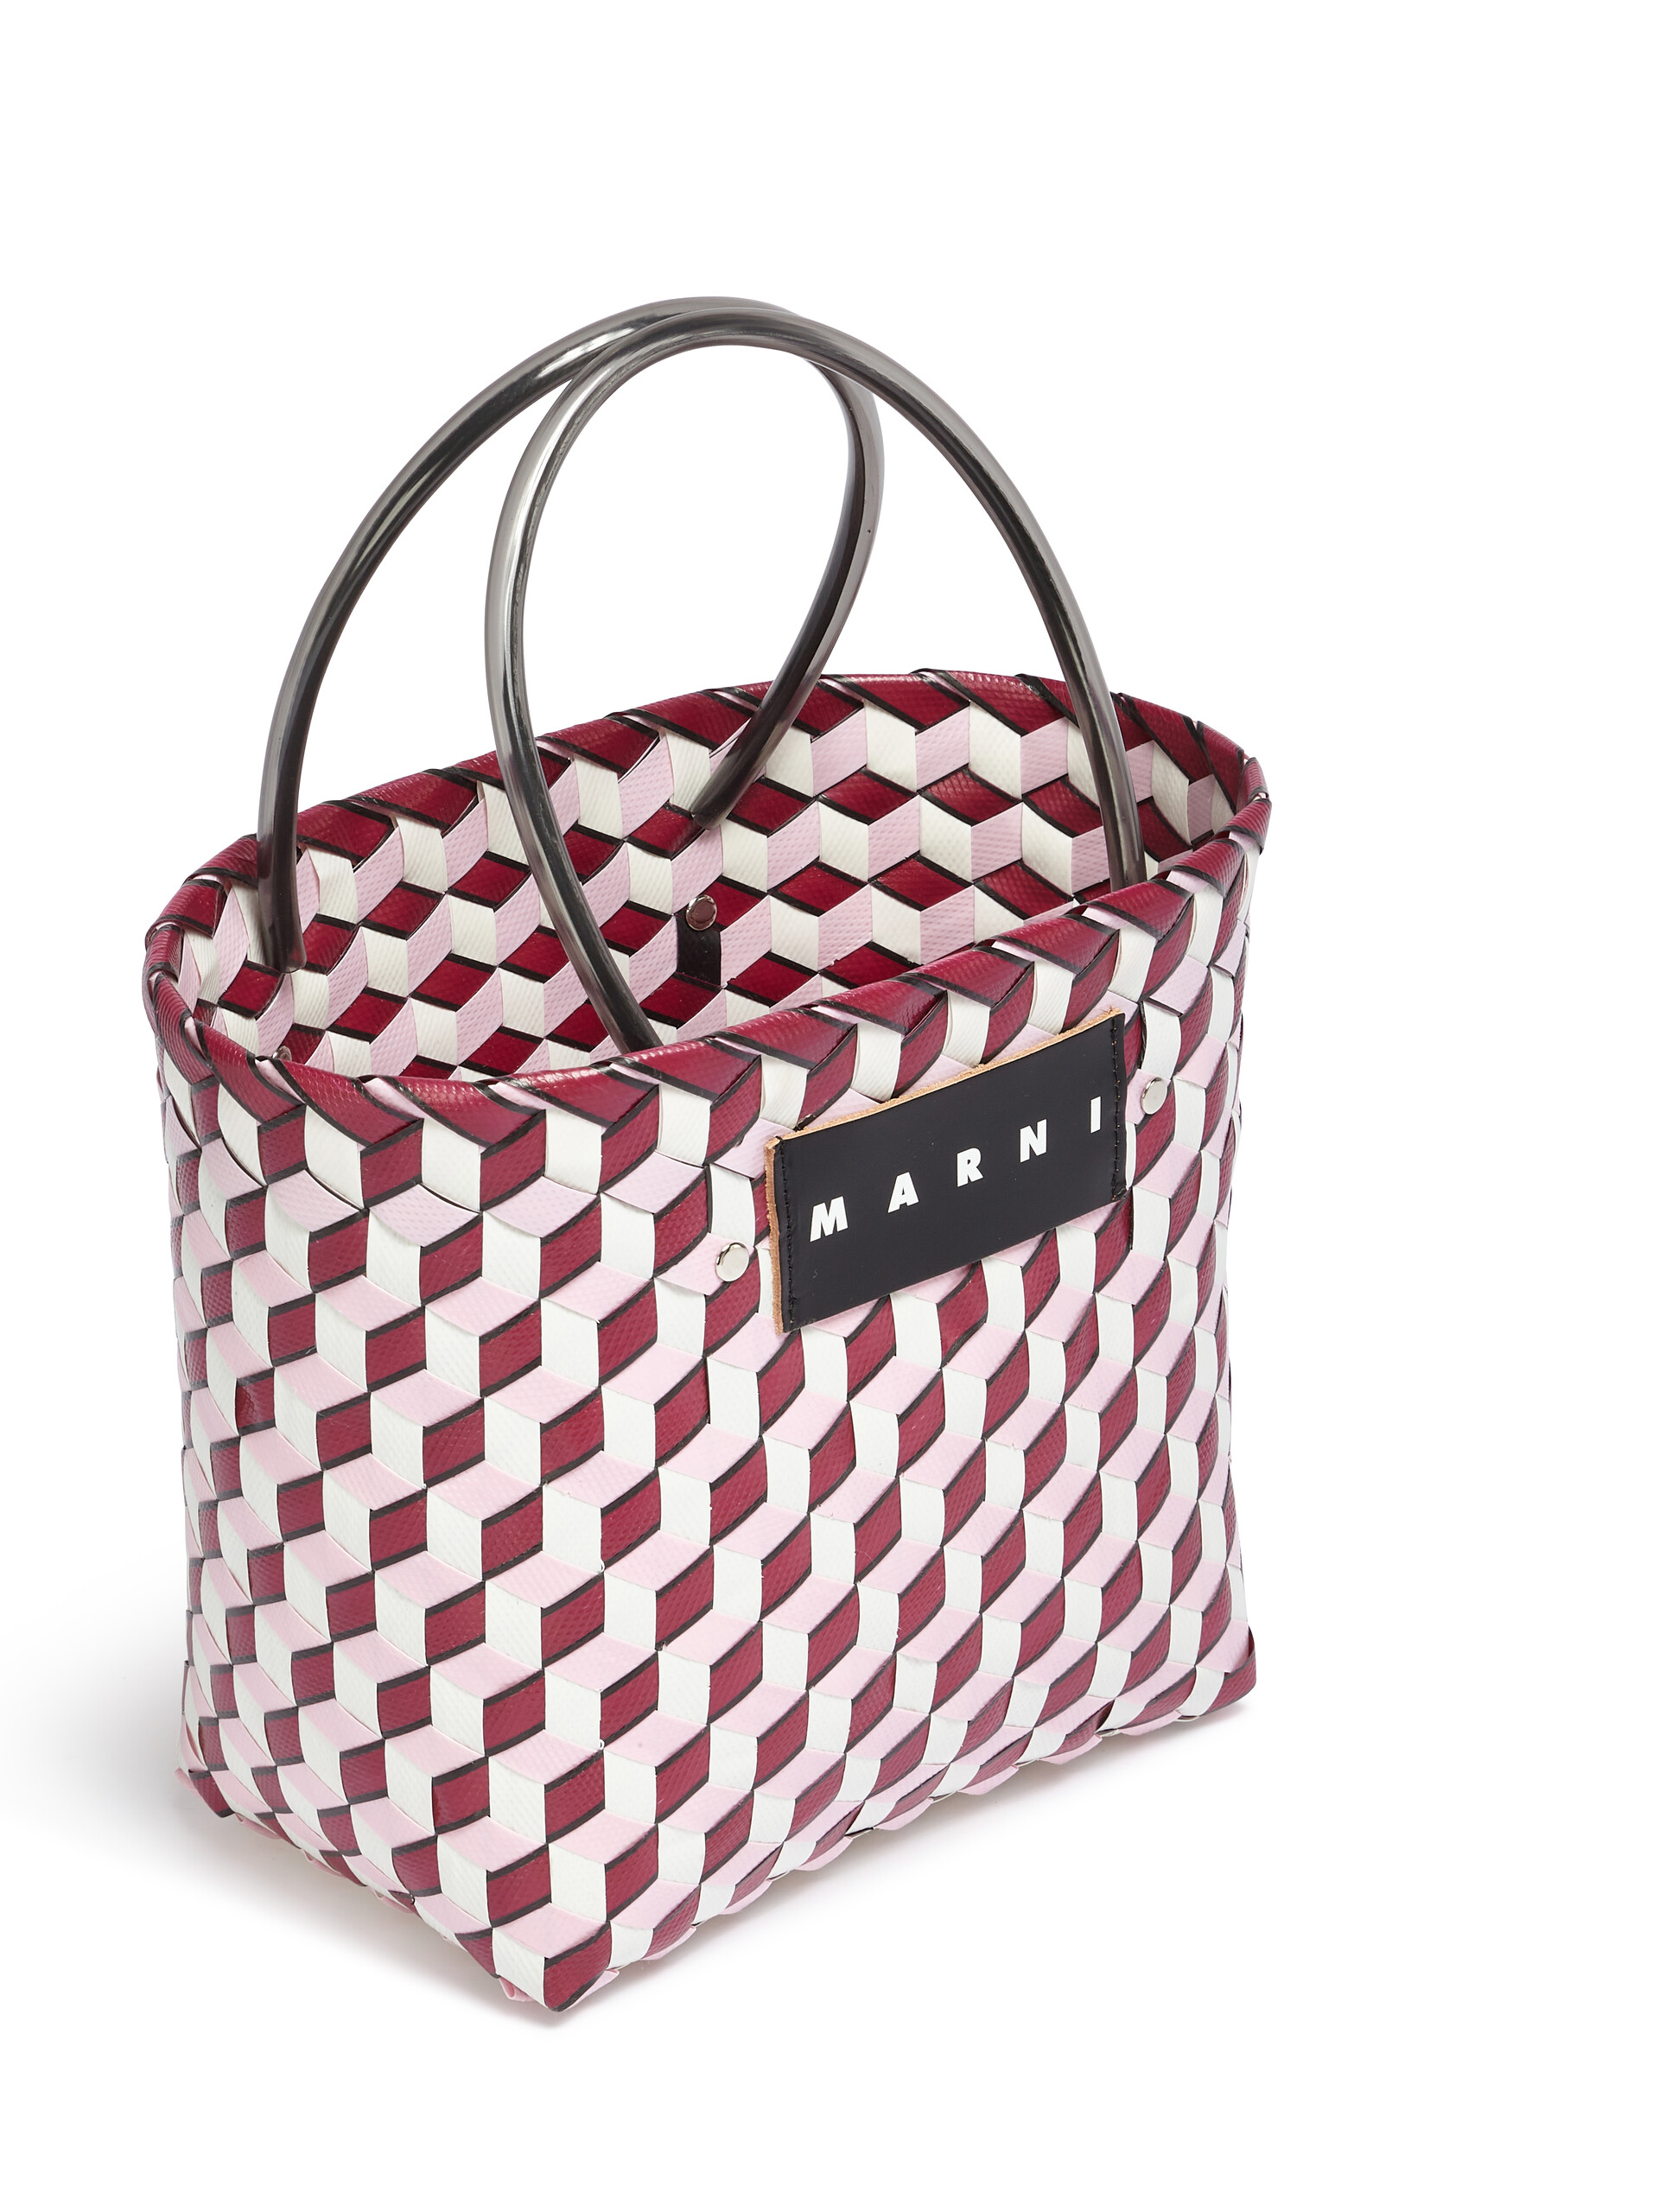 MARNI MARKET 3D BAG in burgundy cube woven material